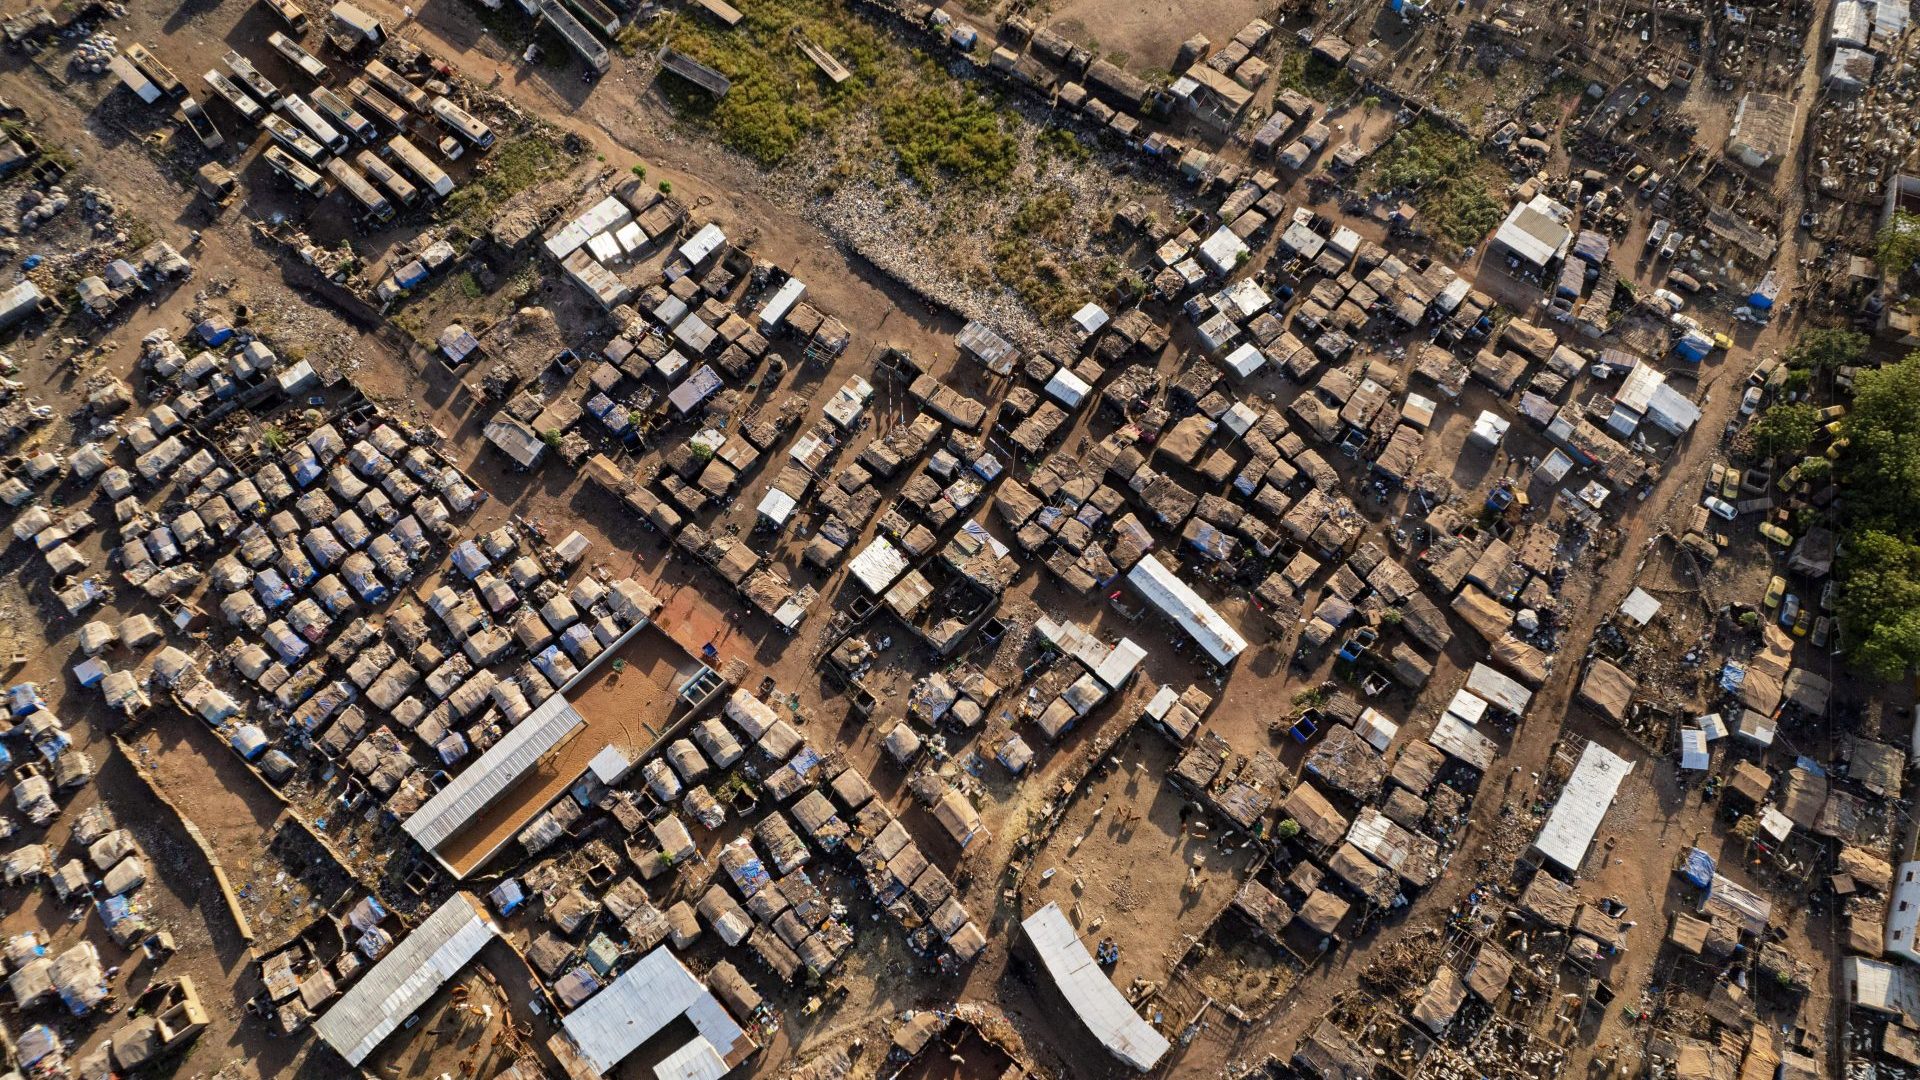 Faladié camp near Bamako, Mali, houses around 1,000 people displaced by the decade-long conflict. Photo: Ousmane Makaveli/ AFP/Getty